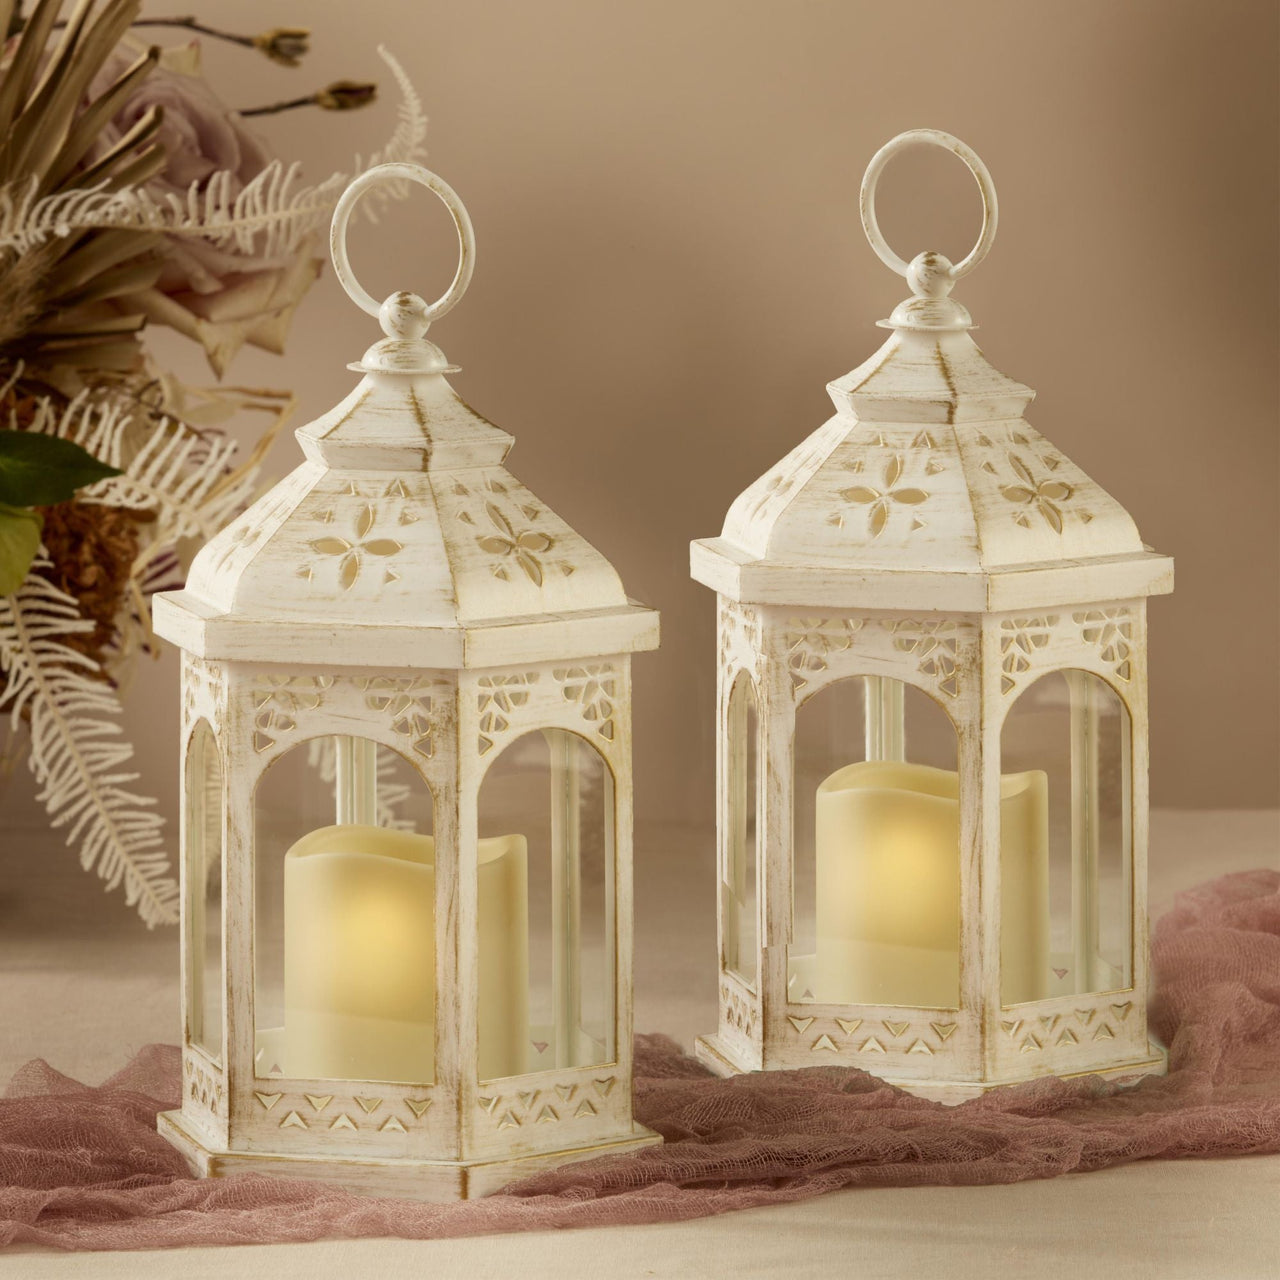 12 Pieces Mini Lanterns with Flickering Led Candle, Batteries Included,  Decorative Hanging Candle Lantern for Indoor Use, Wedding, Party, Table